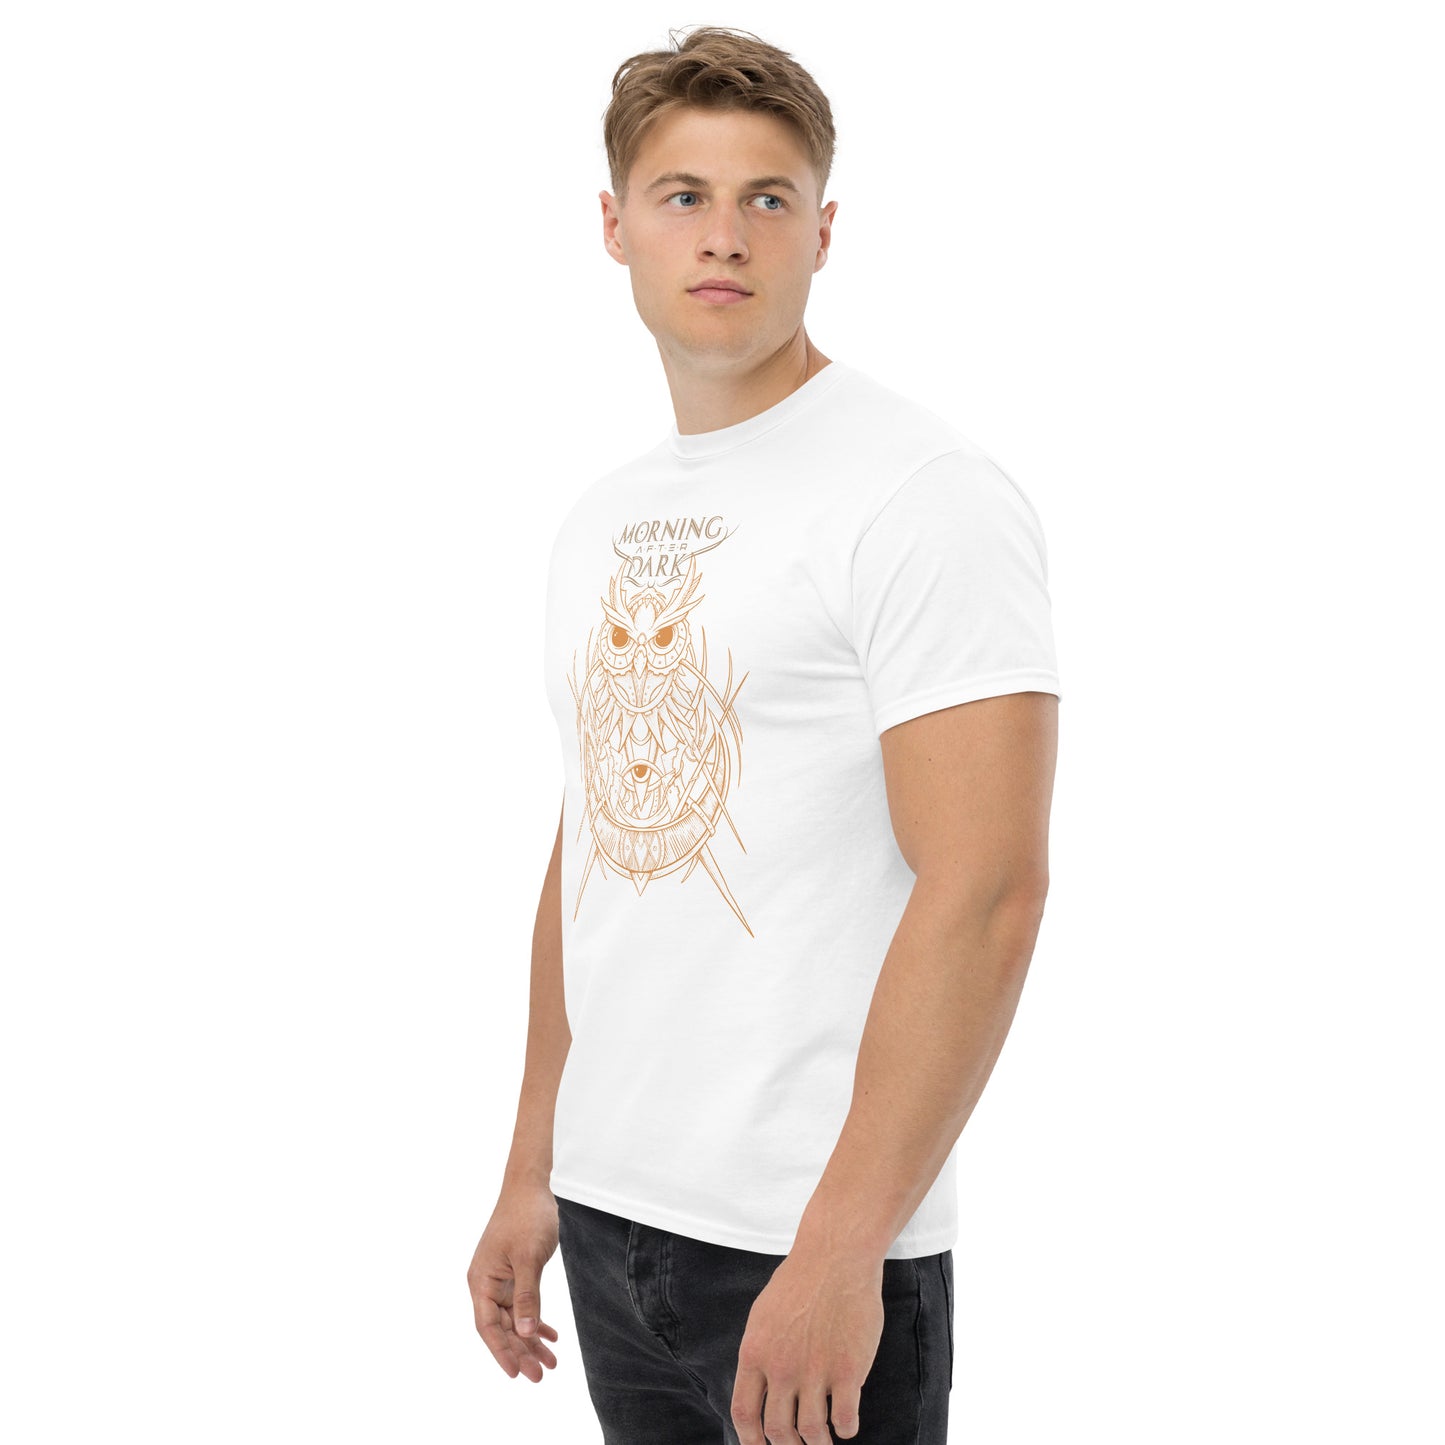 Morning After Dark - Steampunk Owl Gold/White Front - T-Shirt